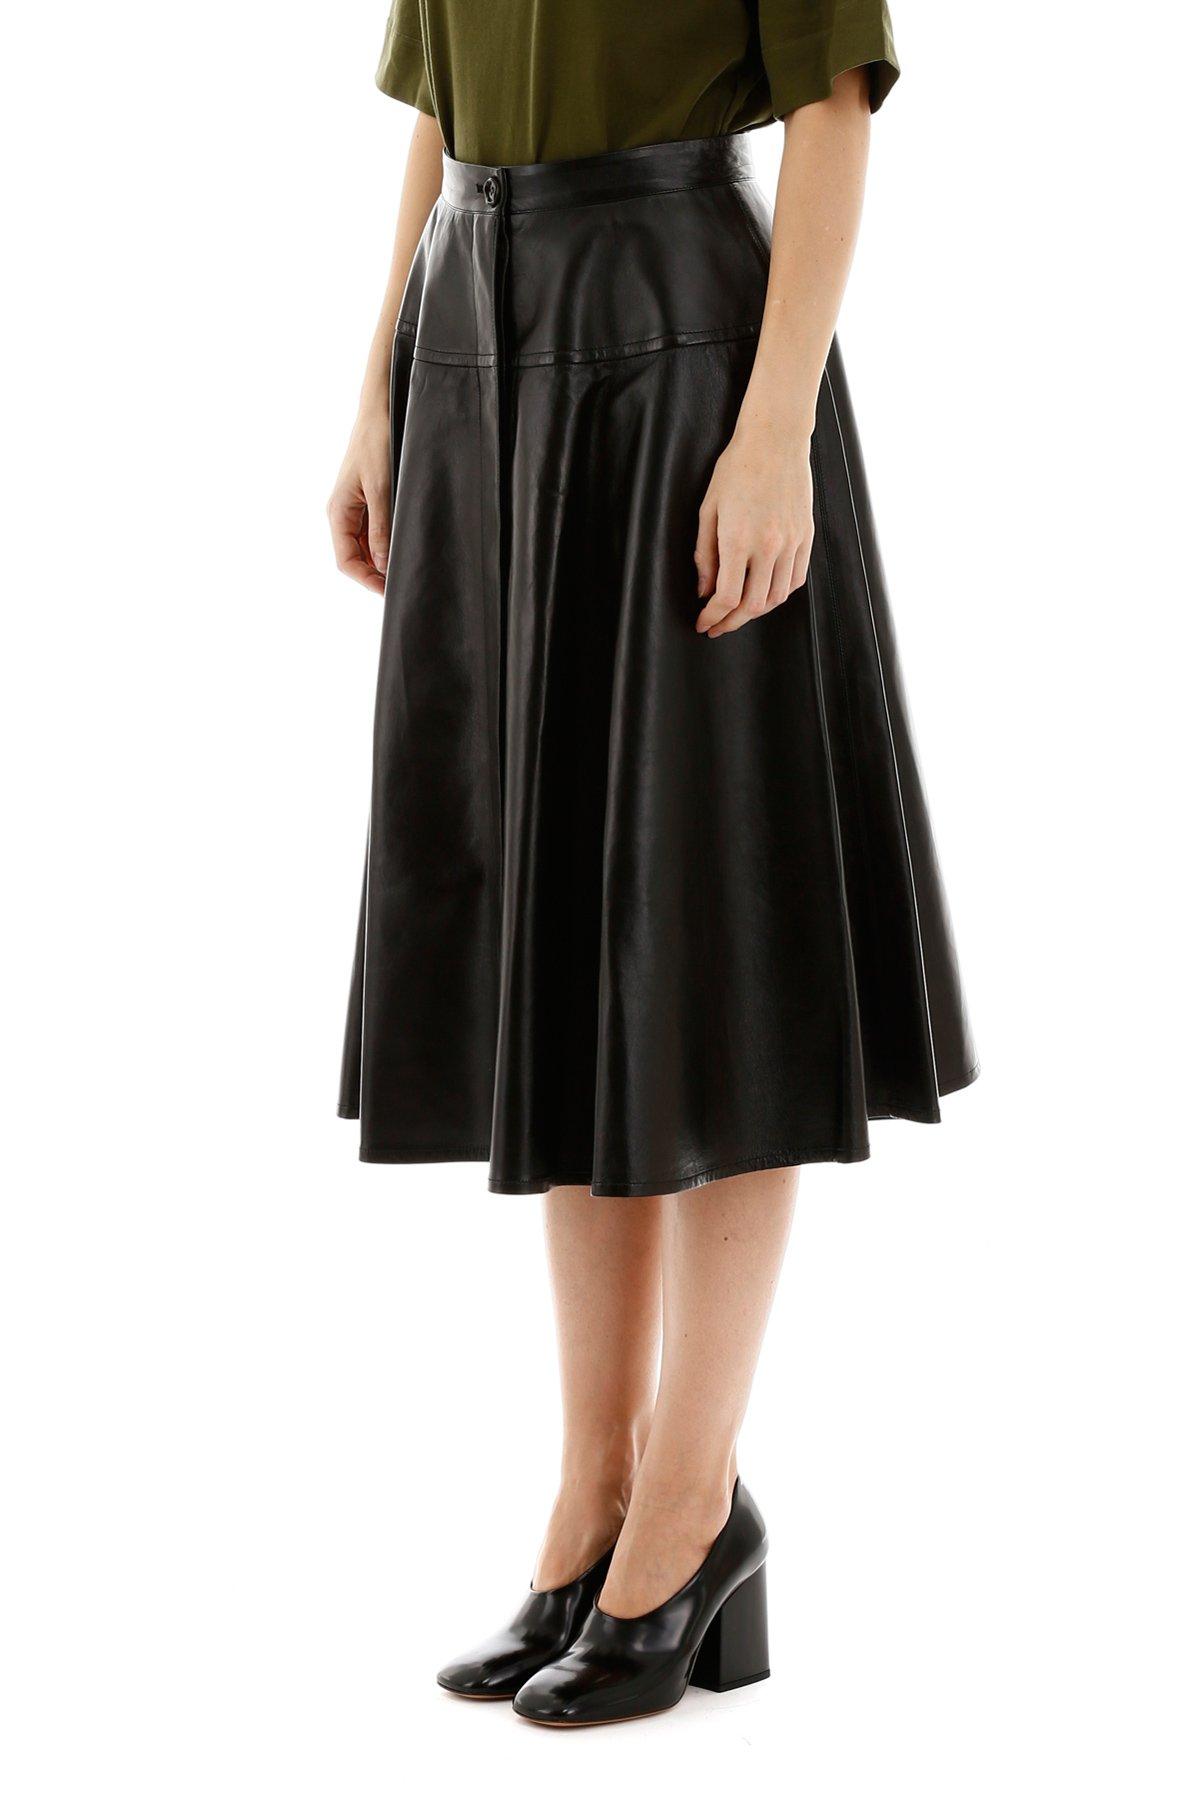 Marni Leather Skirt in Black - Save 16% - Lyst